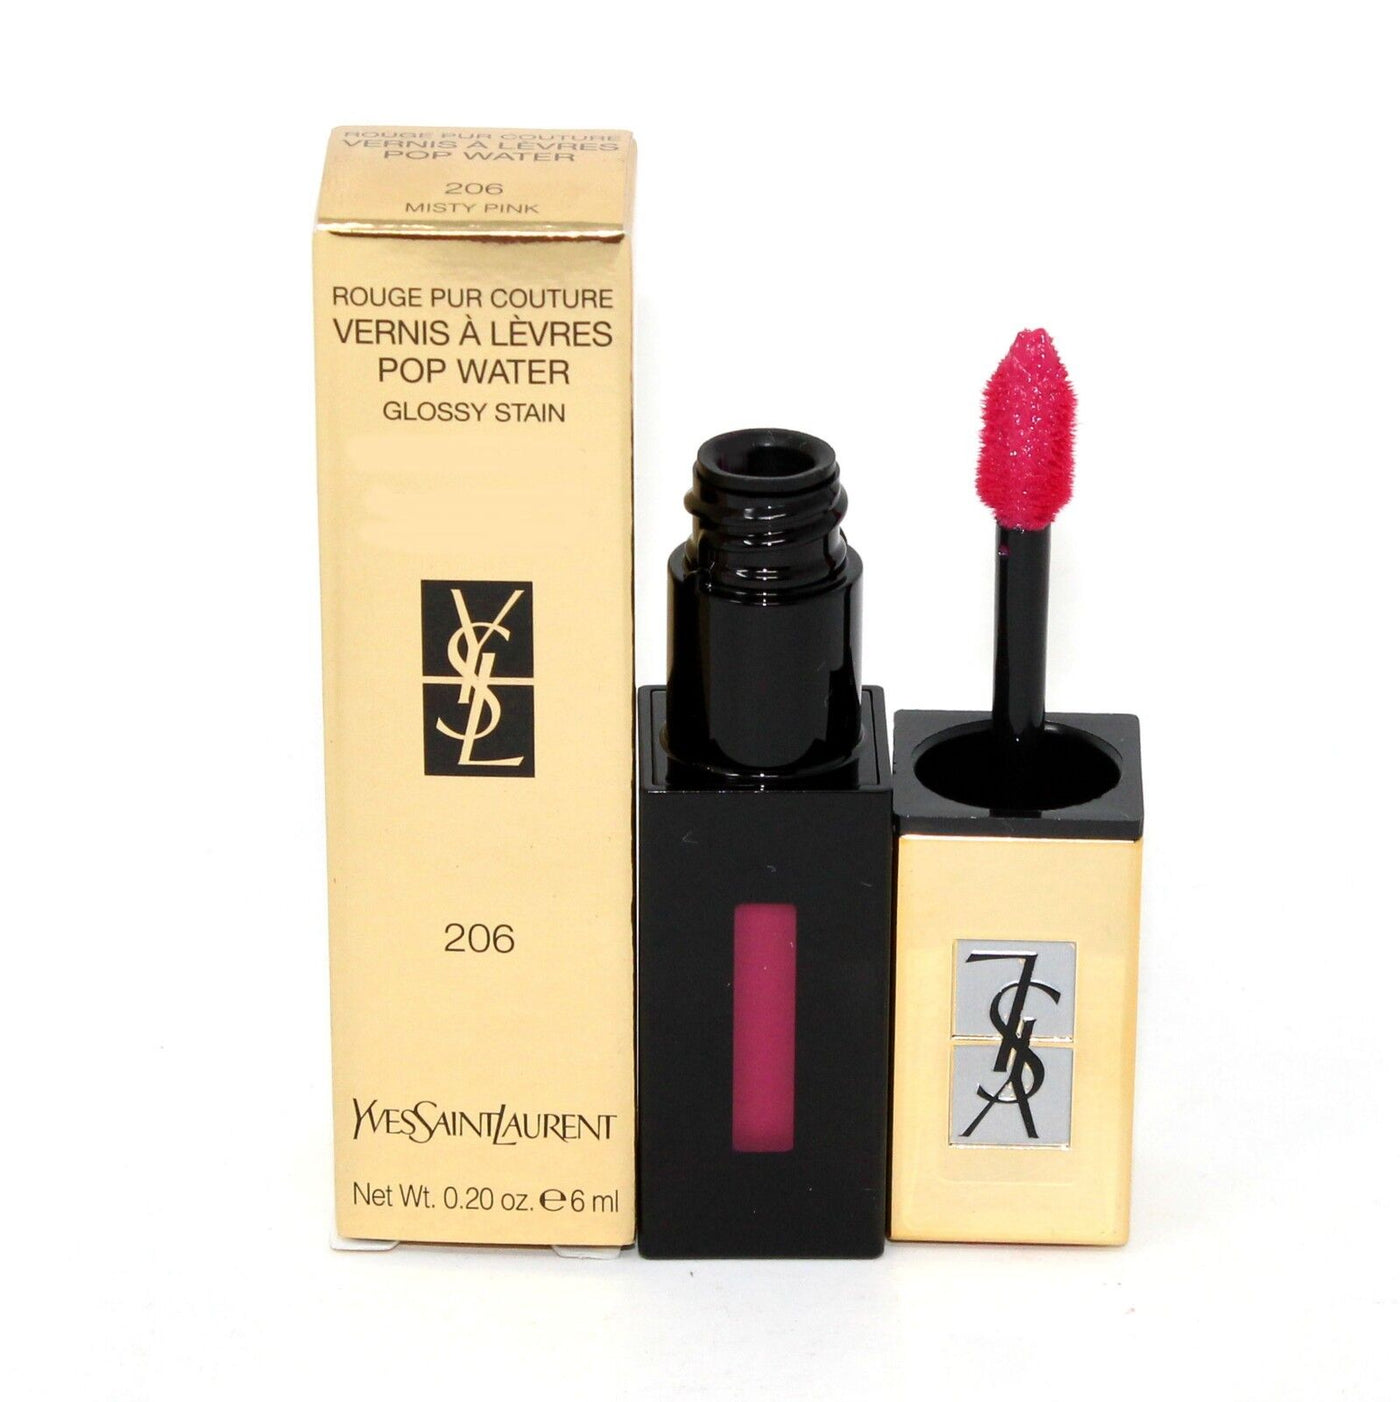 Yves Saint Laurent ROUGE PUR COUTURE VERNIS A LEVRES POP WATER GLOSSY STAIN 6ML #206 MISTY PINK Lip Color